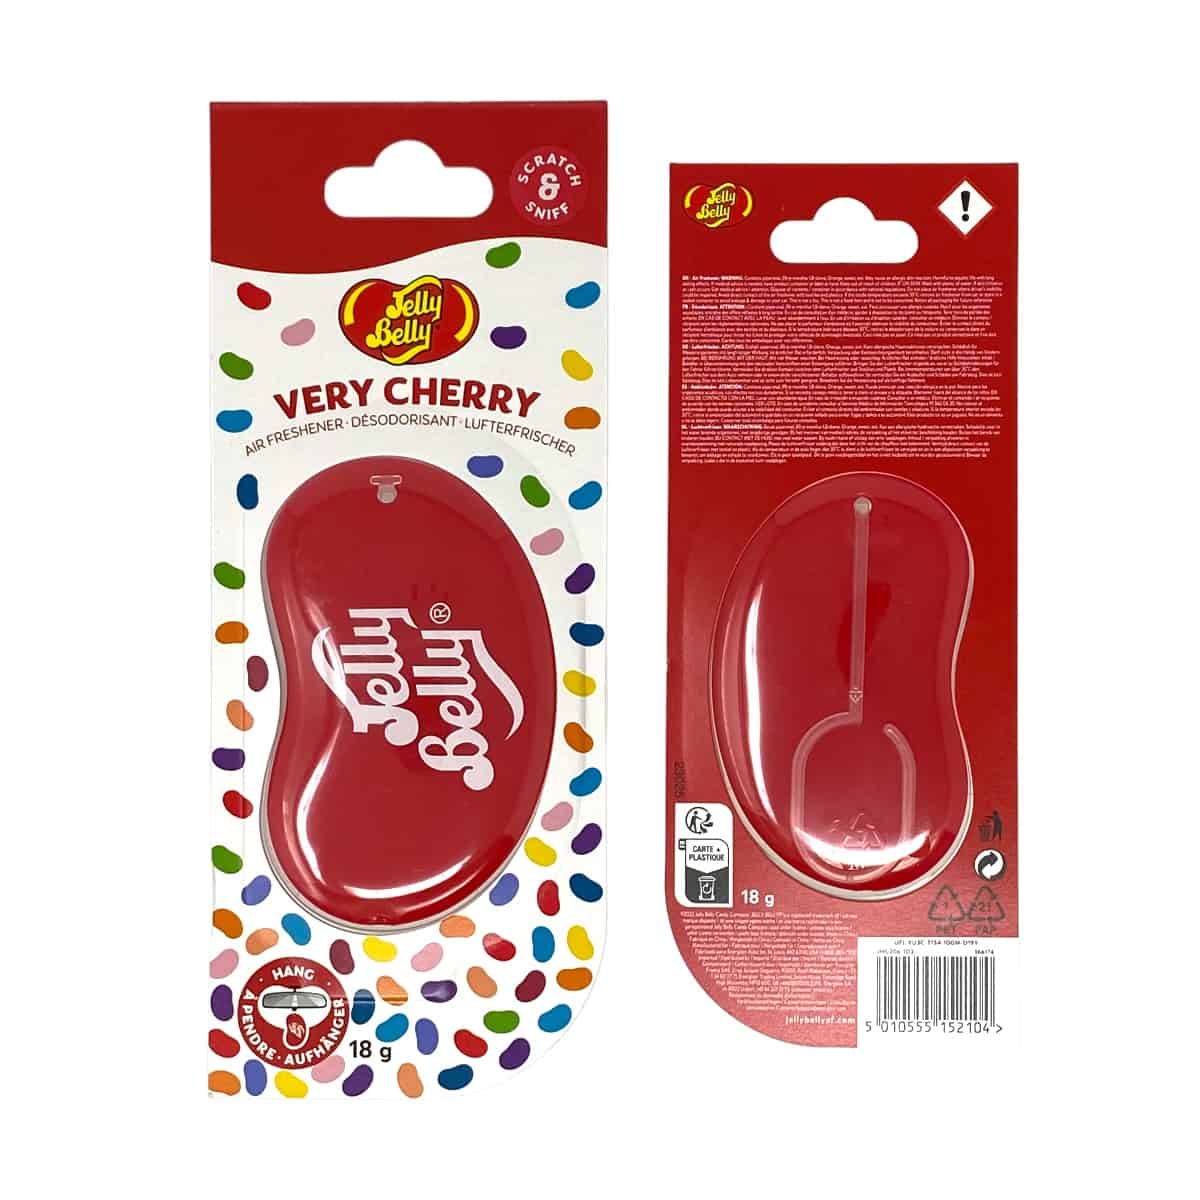 Whether you're looking to enhance the ambiance of your car, home, or office, the Jelly Belly 3D Very Cherry Air Freshener is the ideal choice. Its hanging gel design ensures convenient placement wherever you desire, without taking up valuable space.